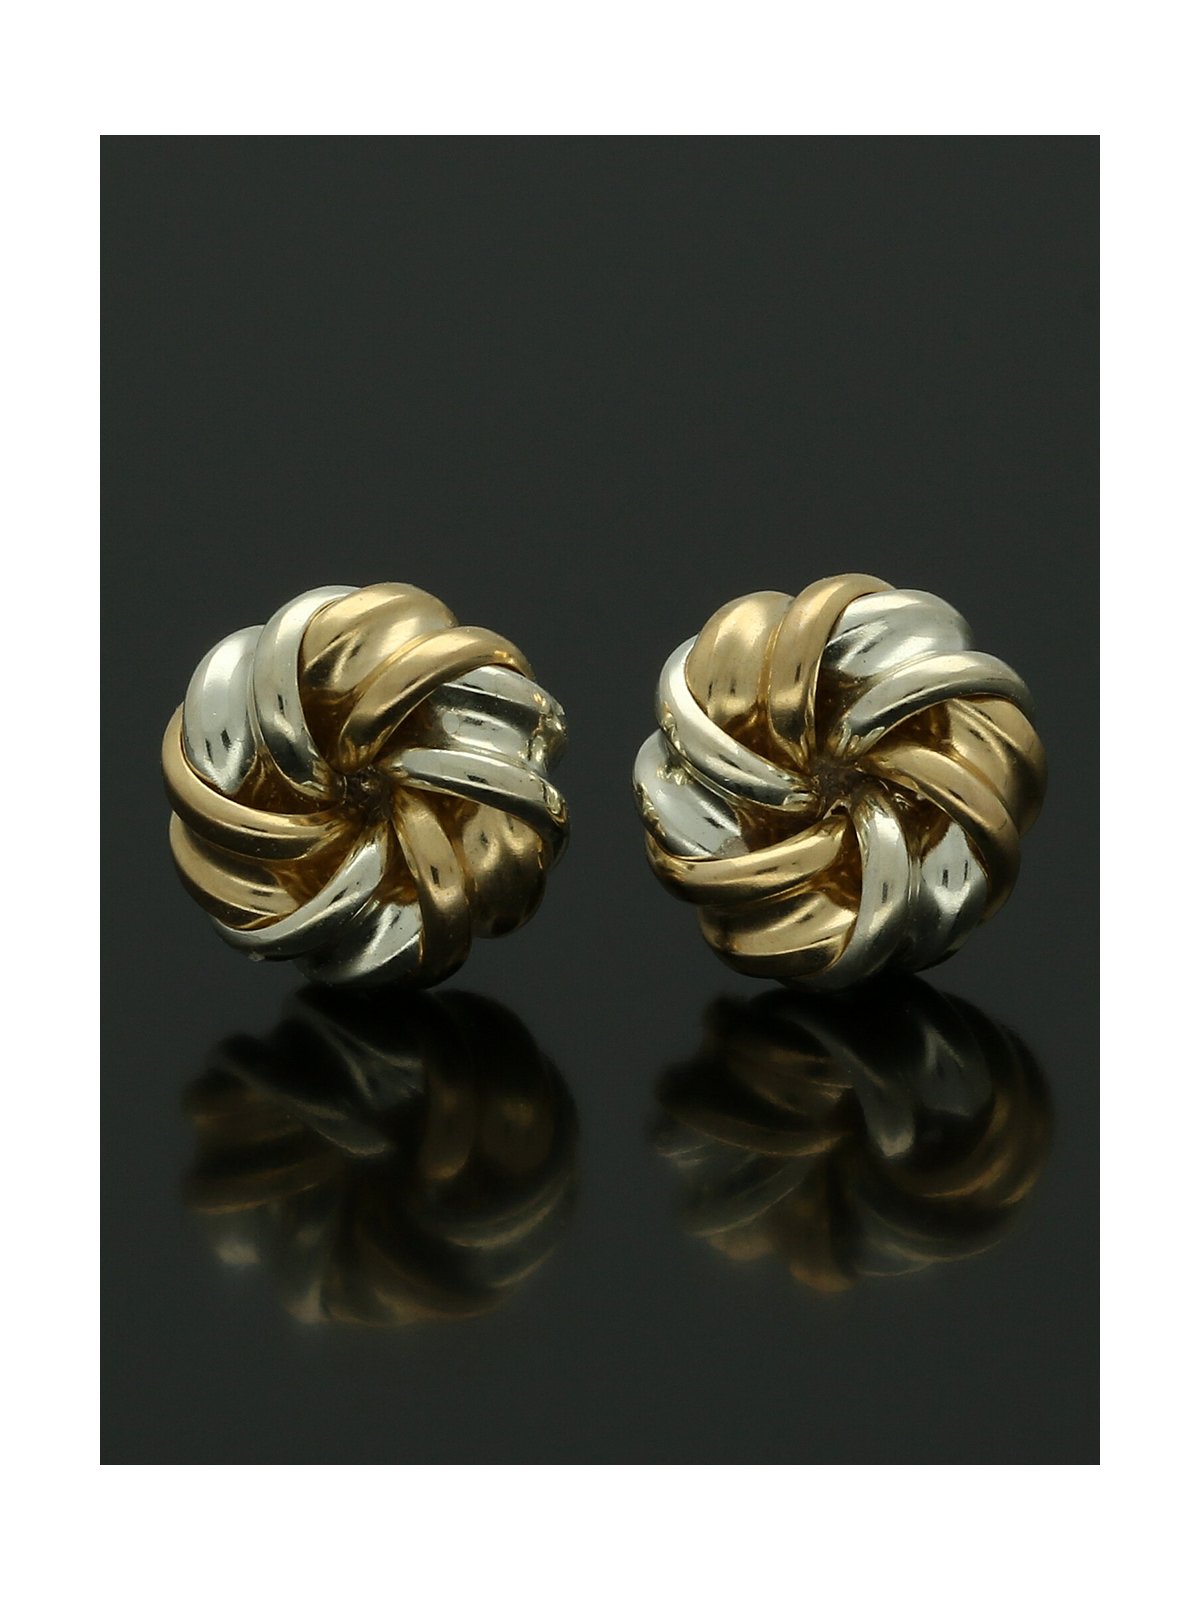 Ribbon Knot Stud Earrings 7mm in 9ct Yellow & White Gold